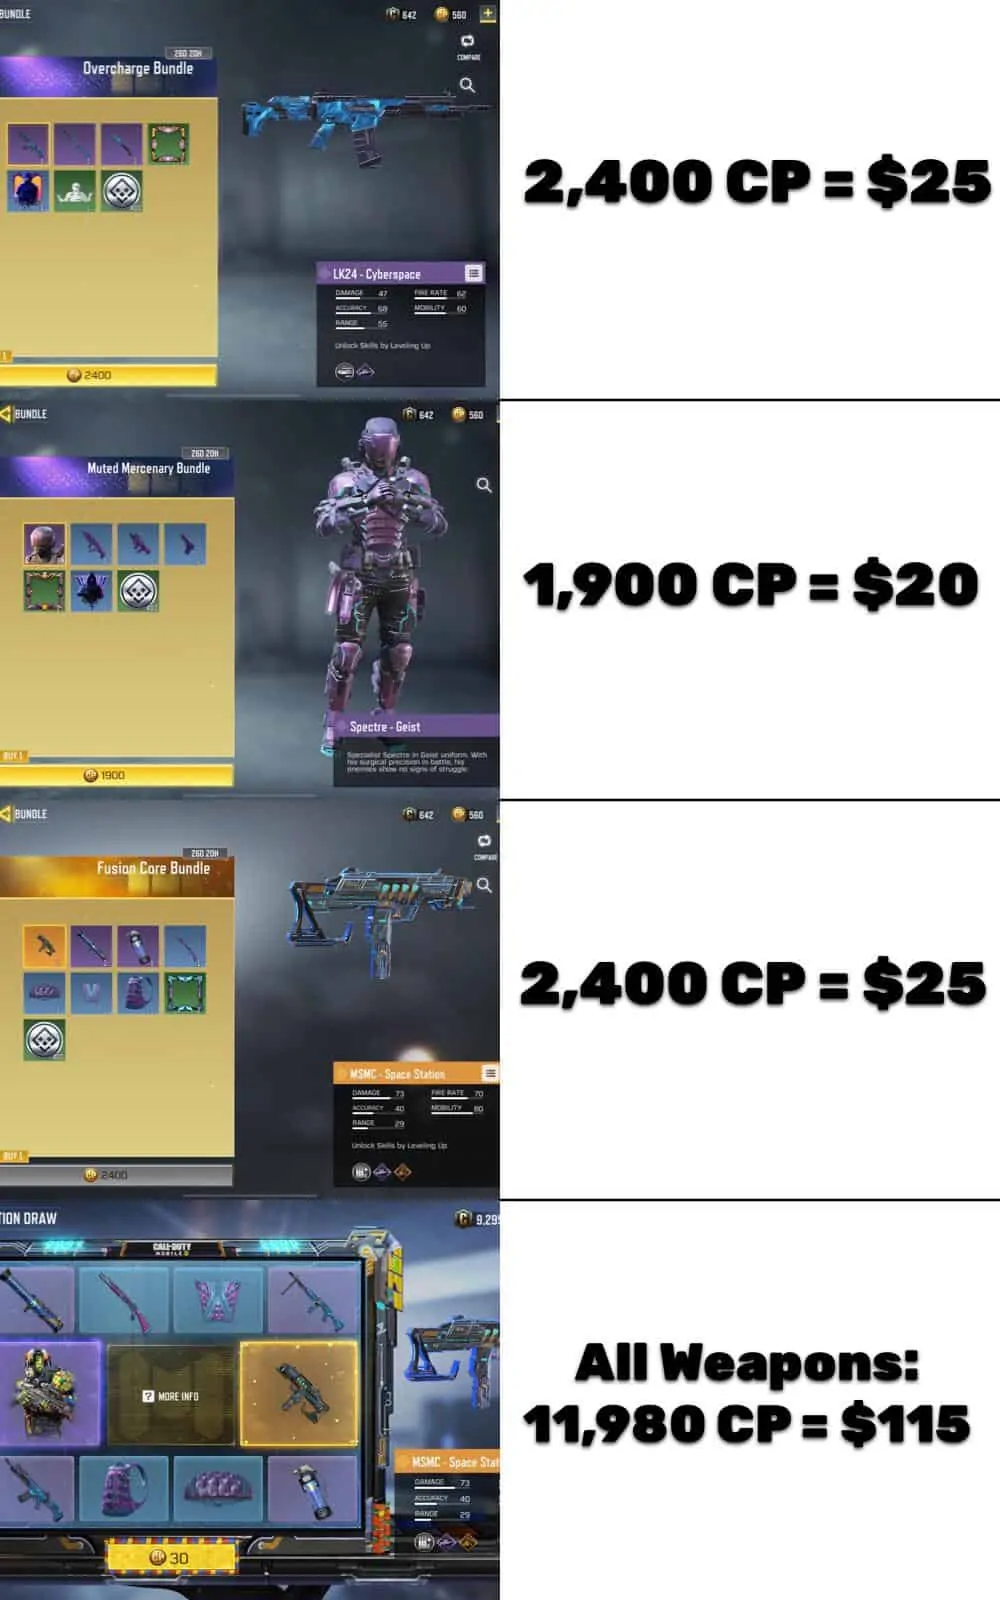 Lucky Draw vs Bundle costs